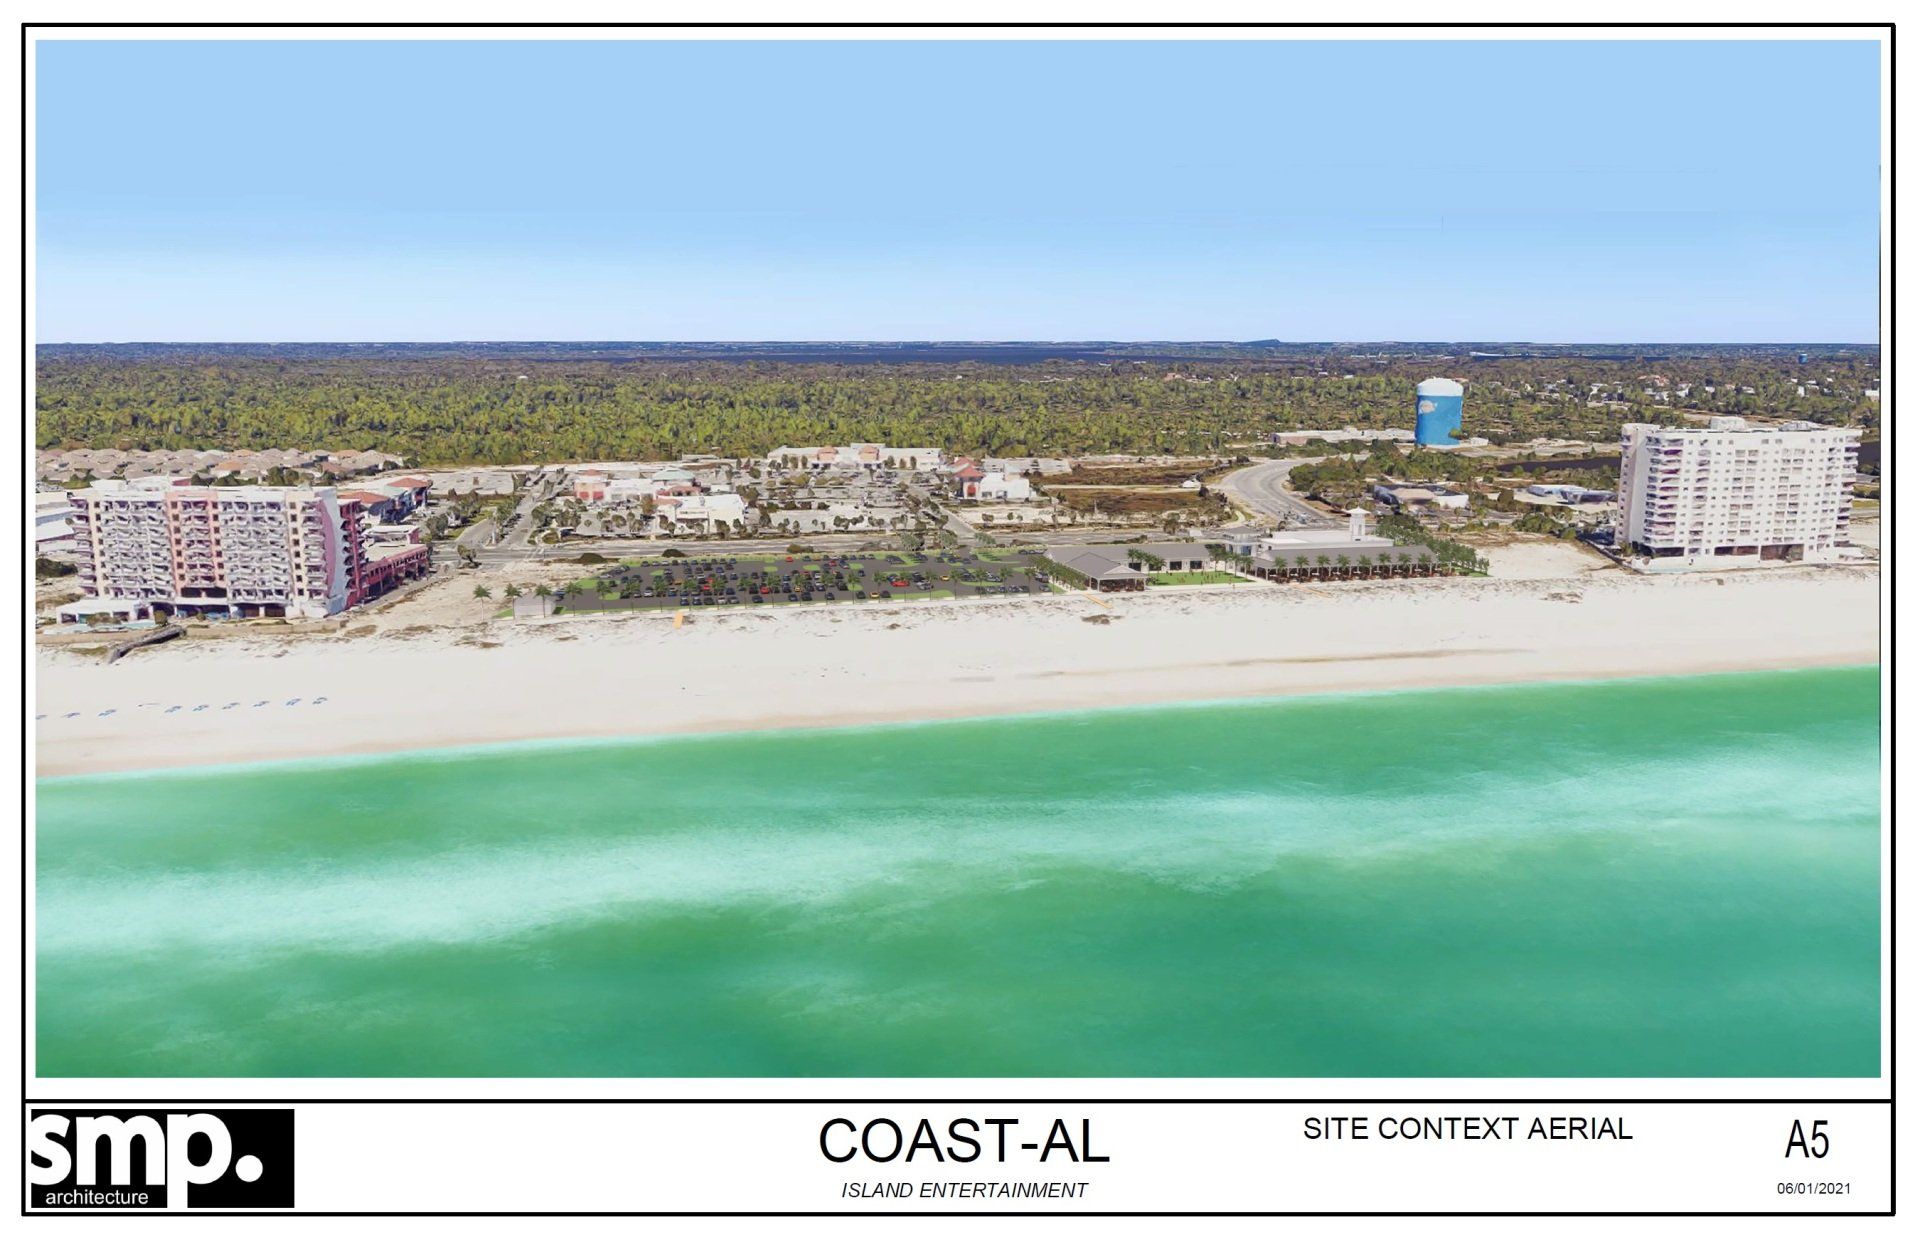 New Orange Beach Beach Project as viewed from the gulf